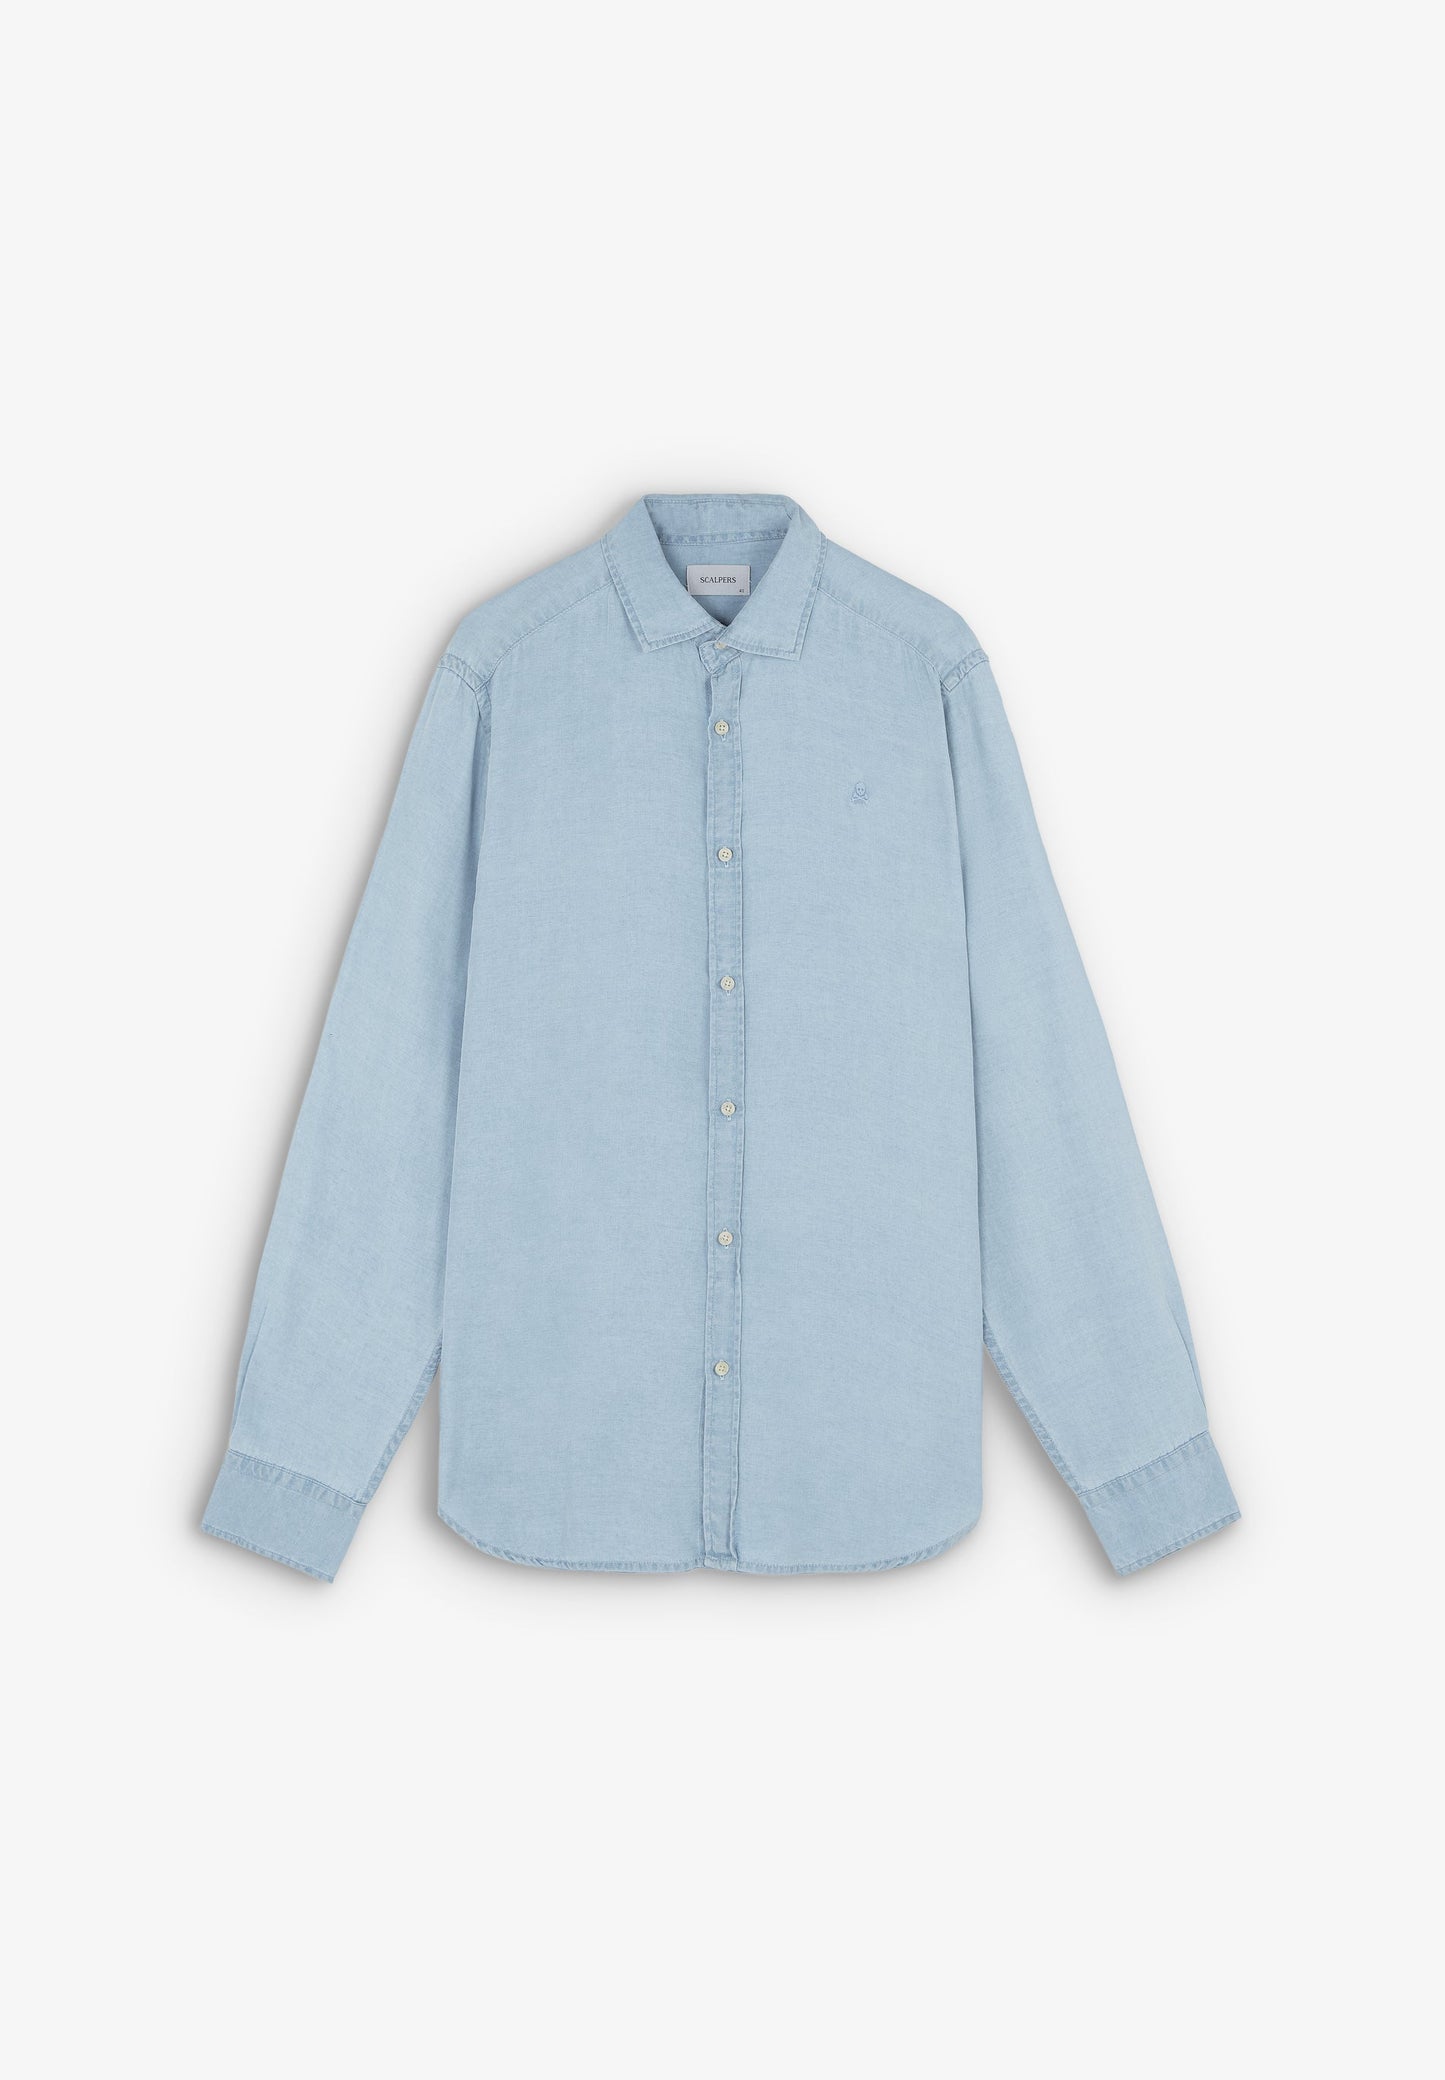 CONTRAST DENIM SHIRT WITH BUTTONS